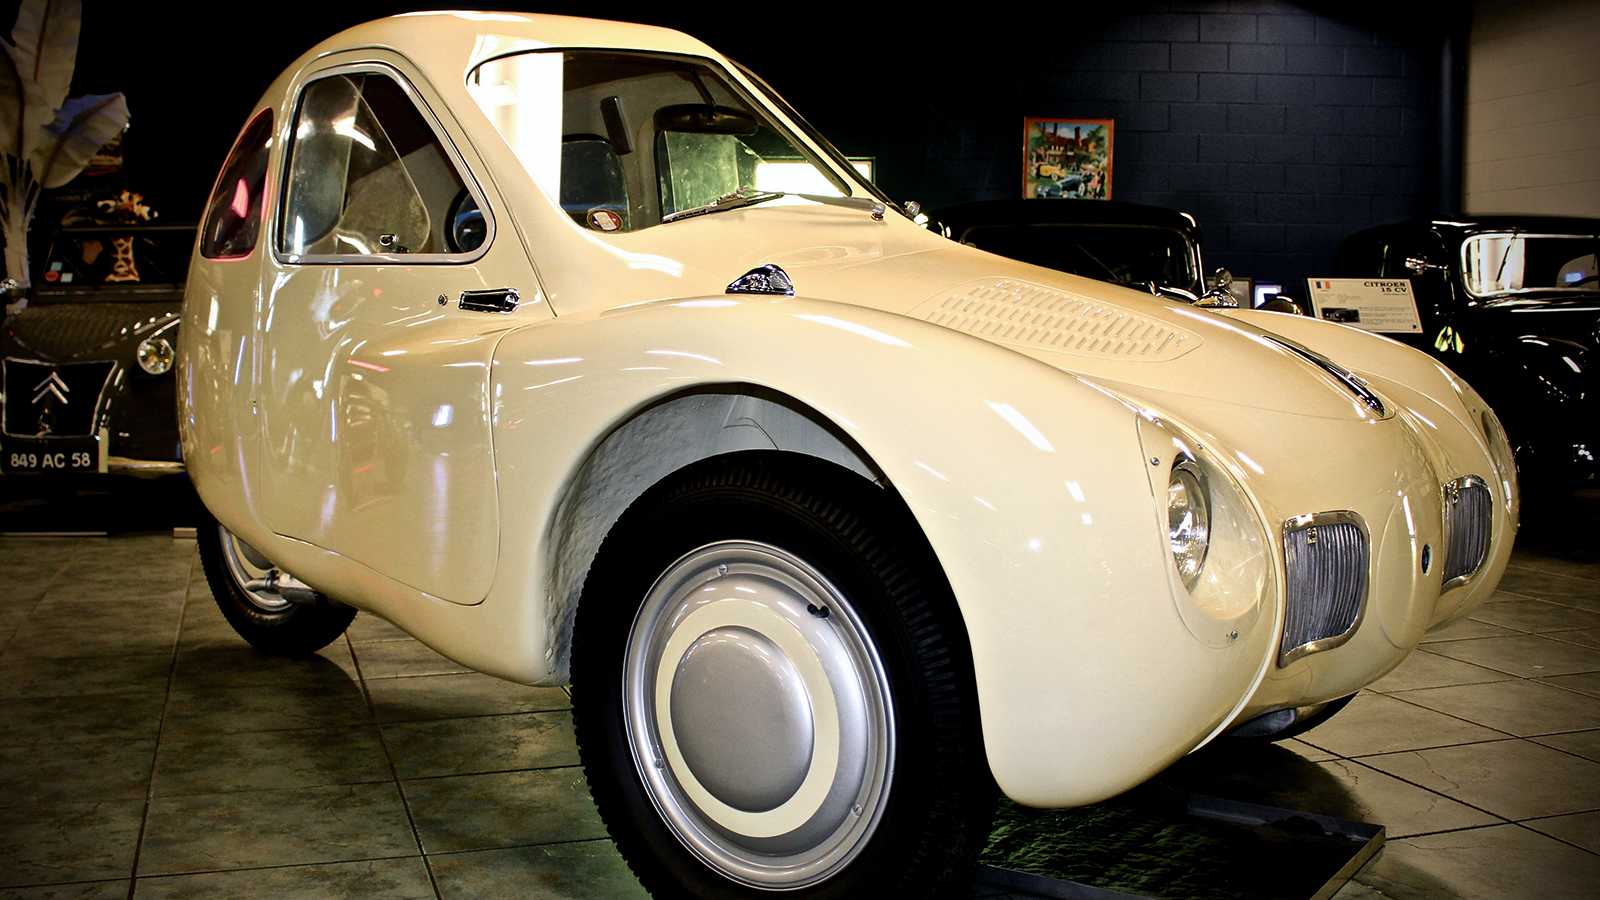 Vauxhall Corsa becomes surprising addition to museum's collection of rare  cars, Museums, corsa 